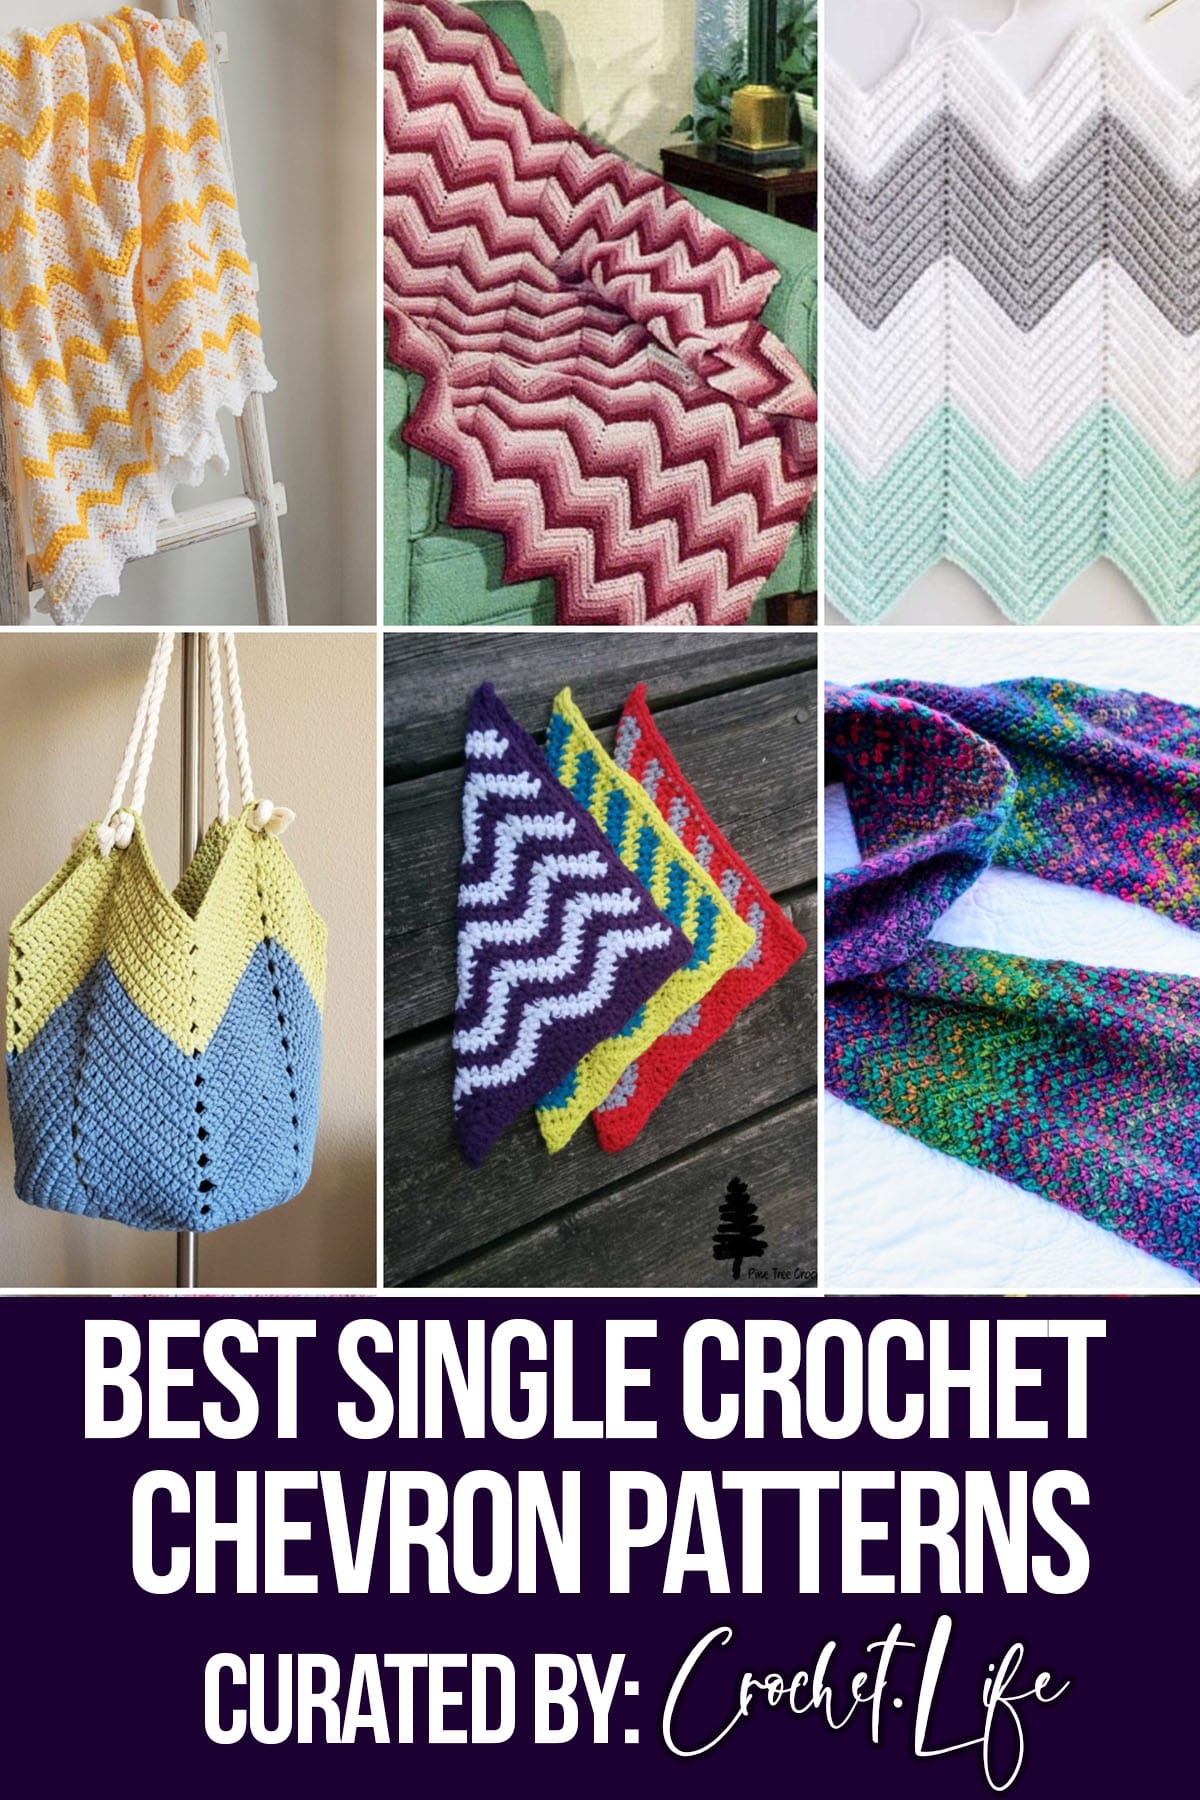 photo collage of chevron crochet patterns with text which reads best single crochet chevron patterns curated by crochet.life